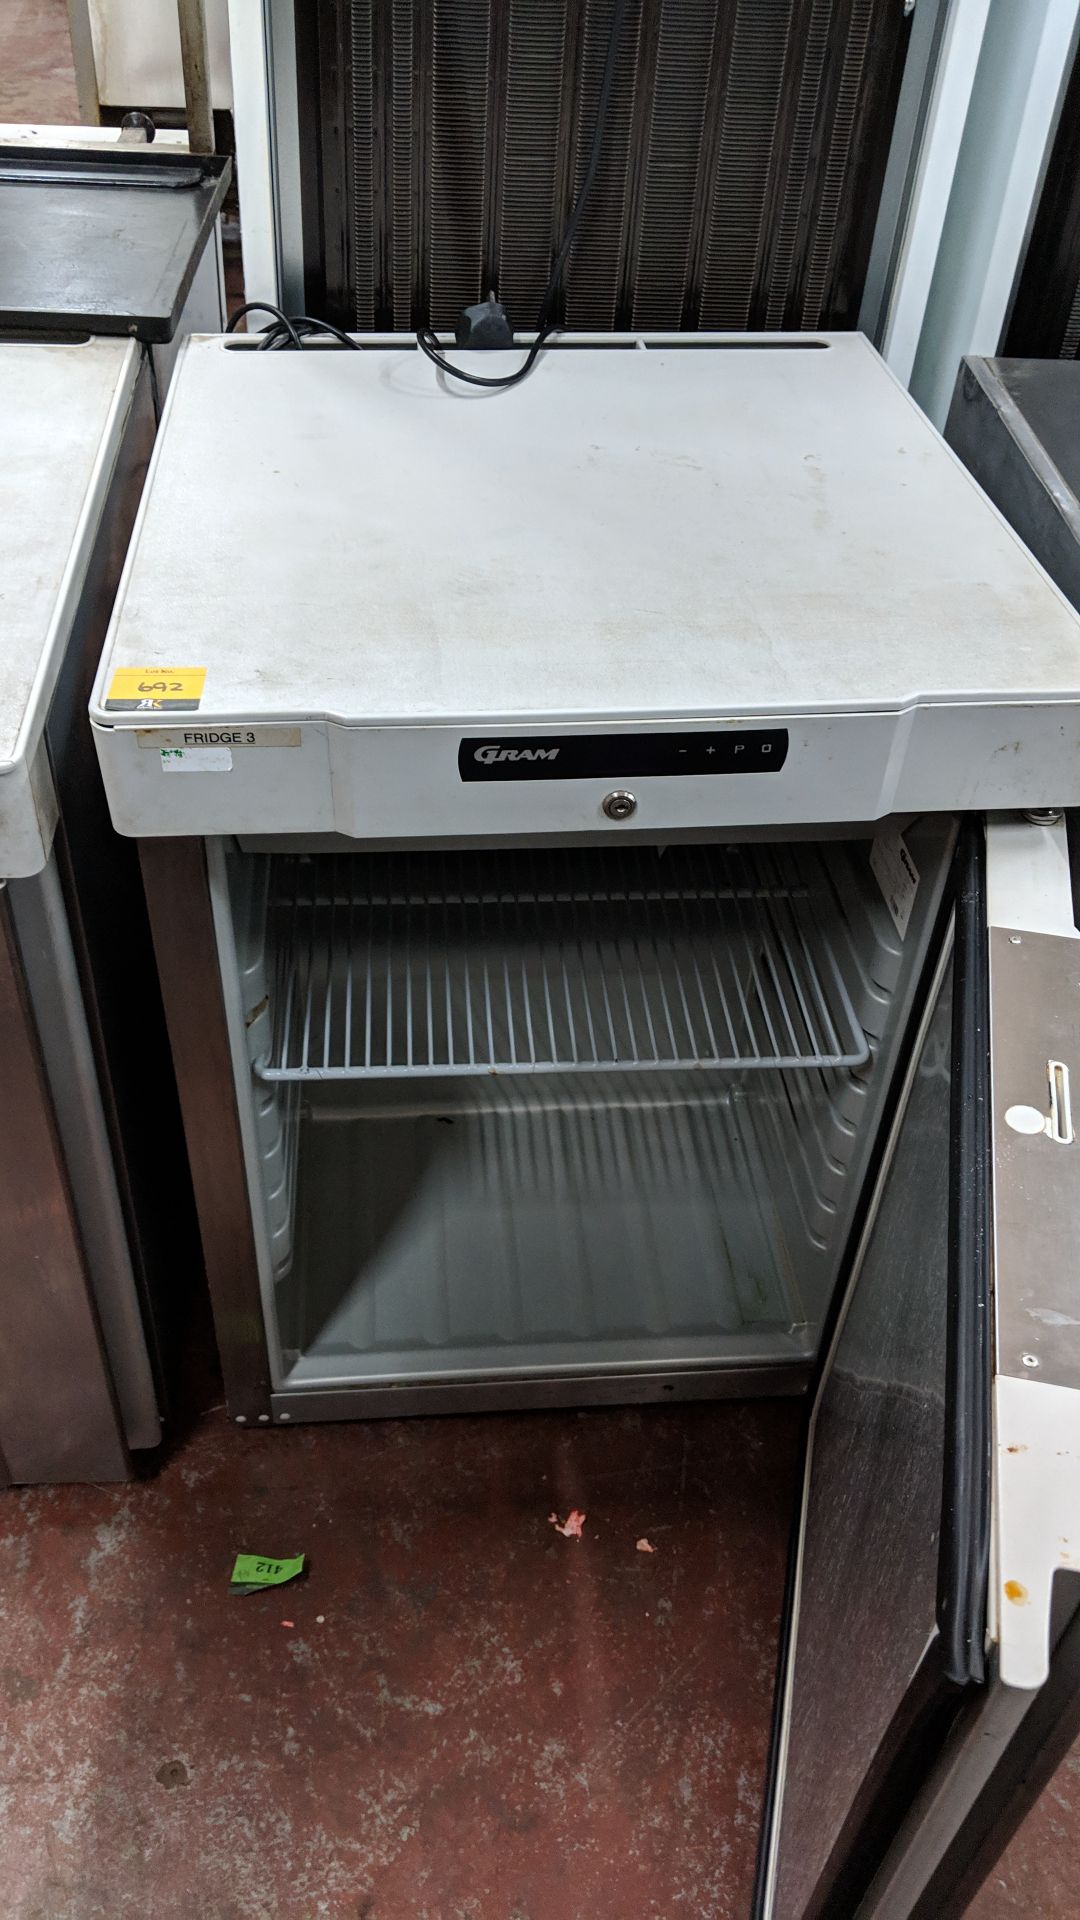 Gram stainless steel under counter fridge IMPORTANT: Please remember goods successfully bid upon - Image 3 of 4